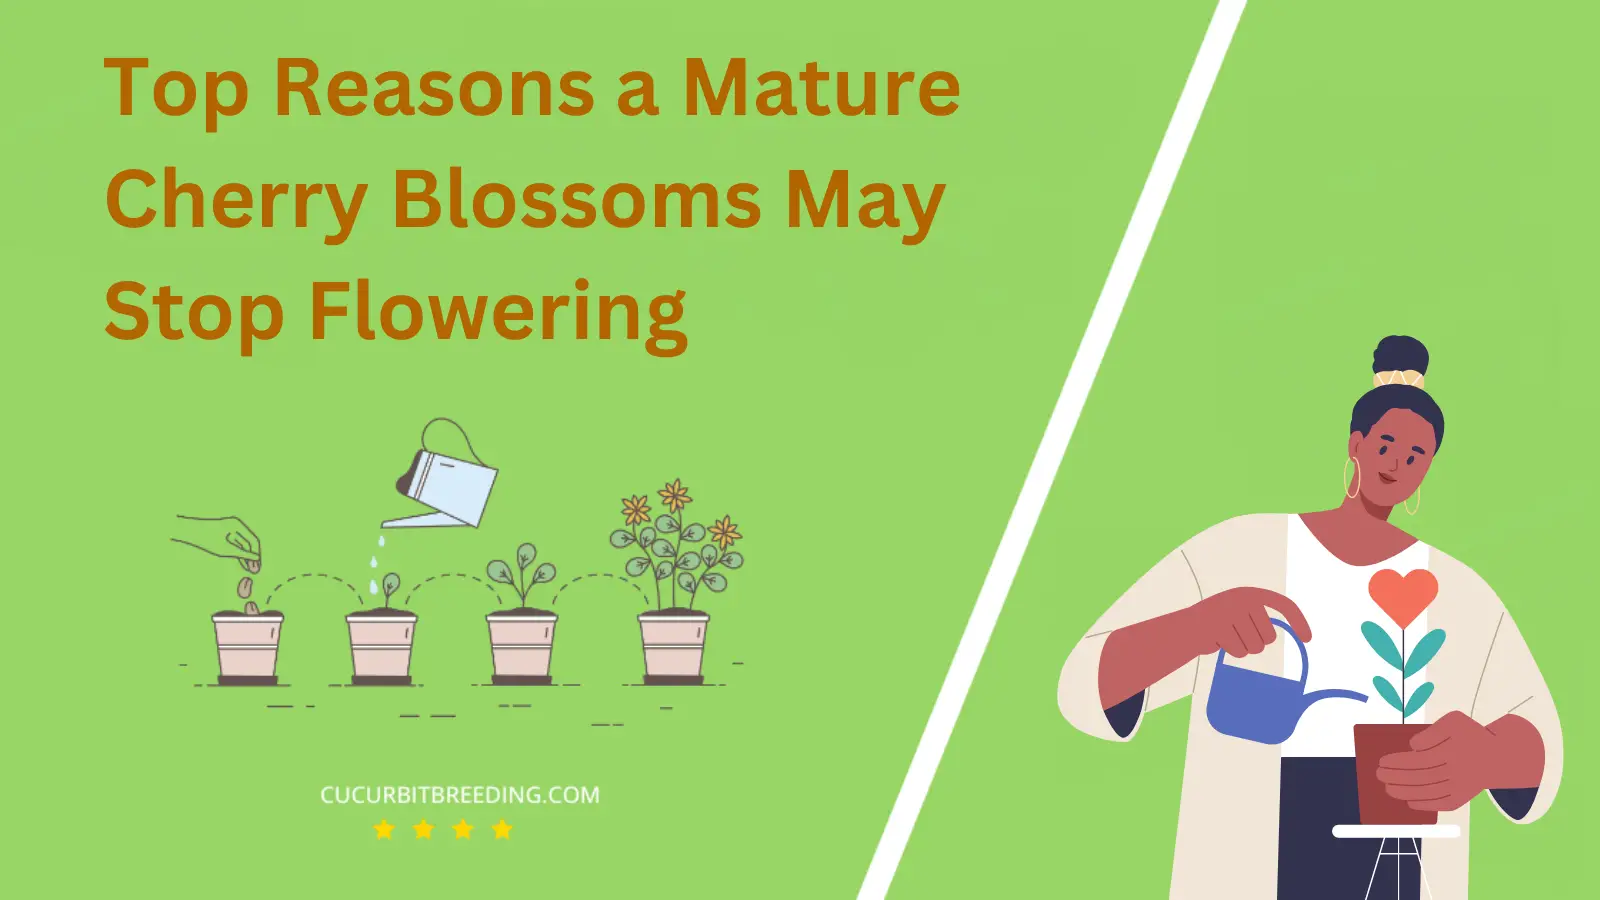 Top Reasons a Mature Cherry Blossoms May Stop Flowering